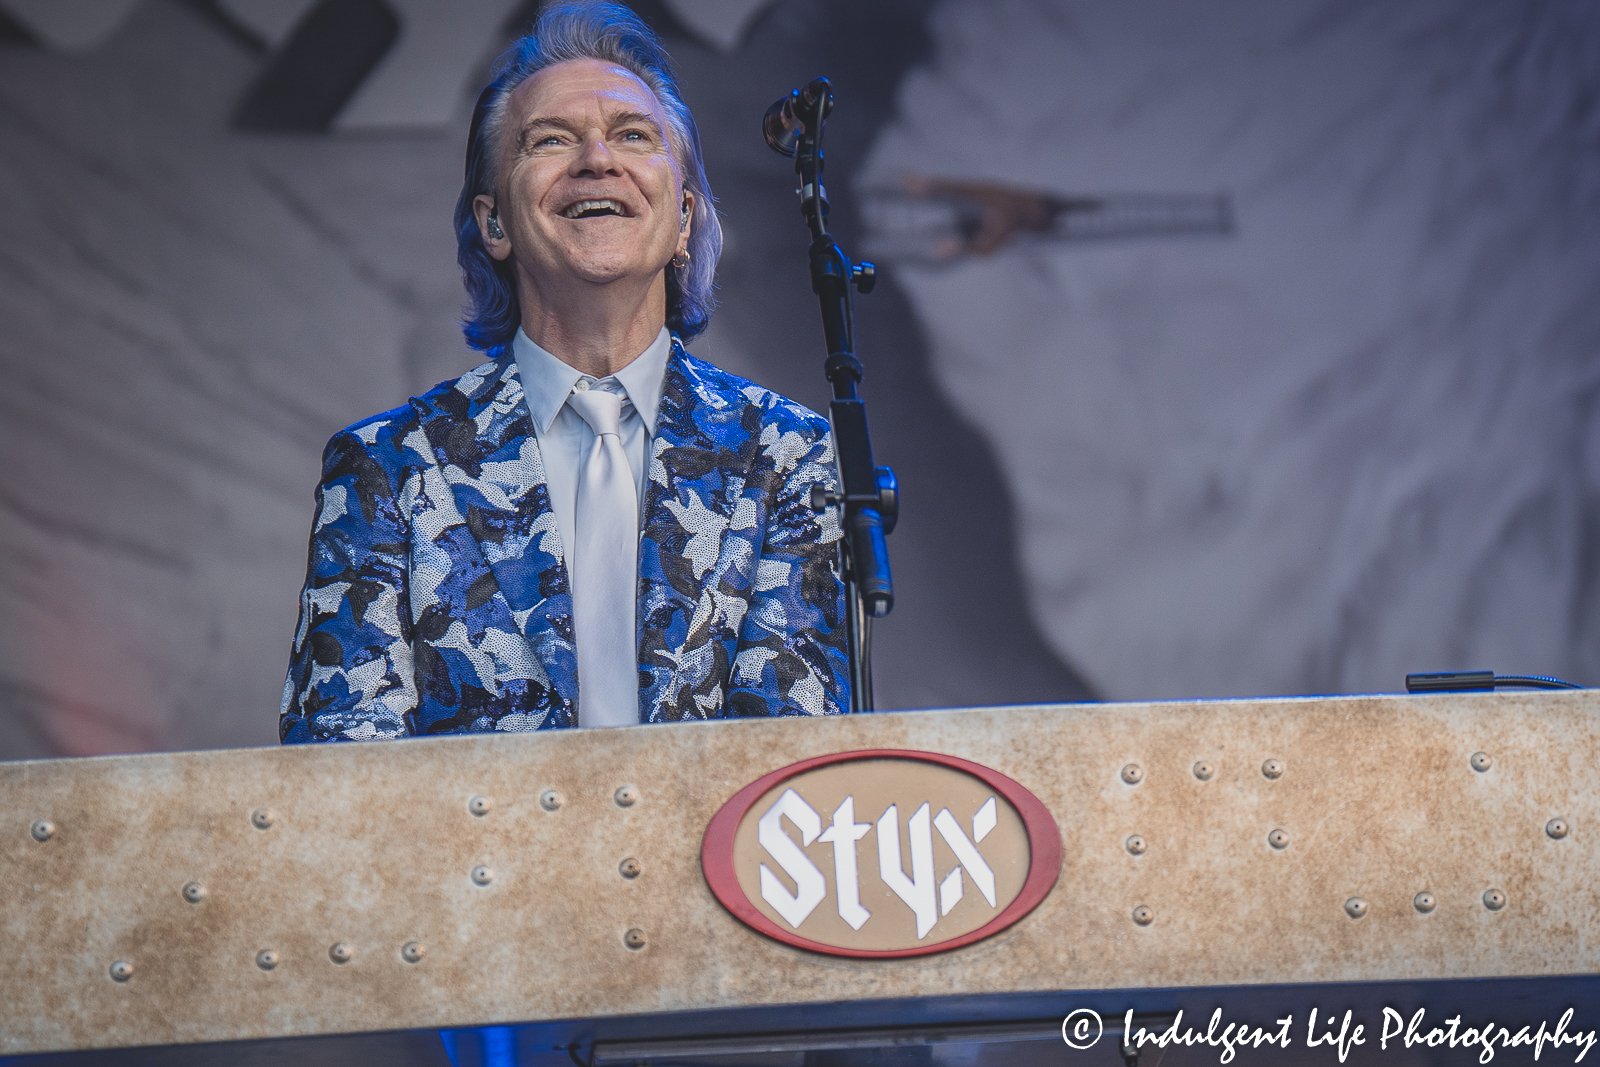 Styx frontman and keyboard player Lawrence Gowan performing live at Starlight Theatre in Kansas City, MO on June 14, 2022.